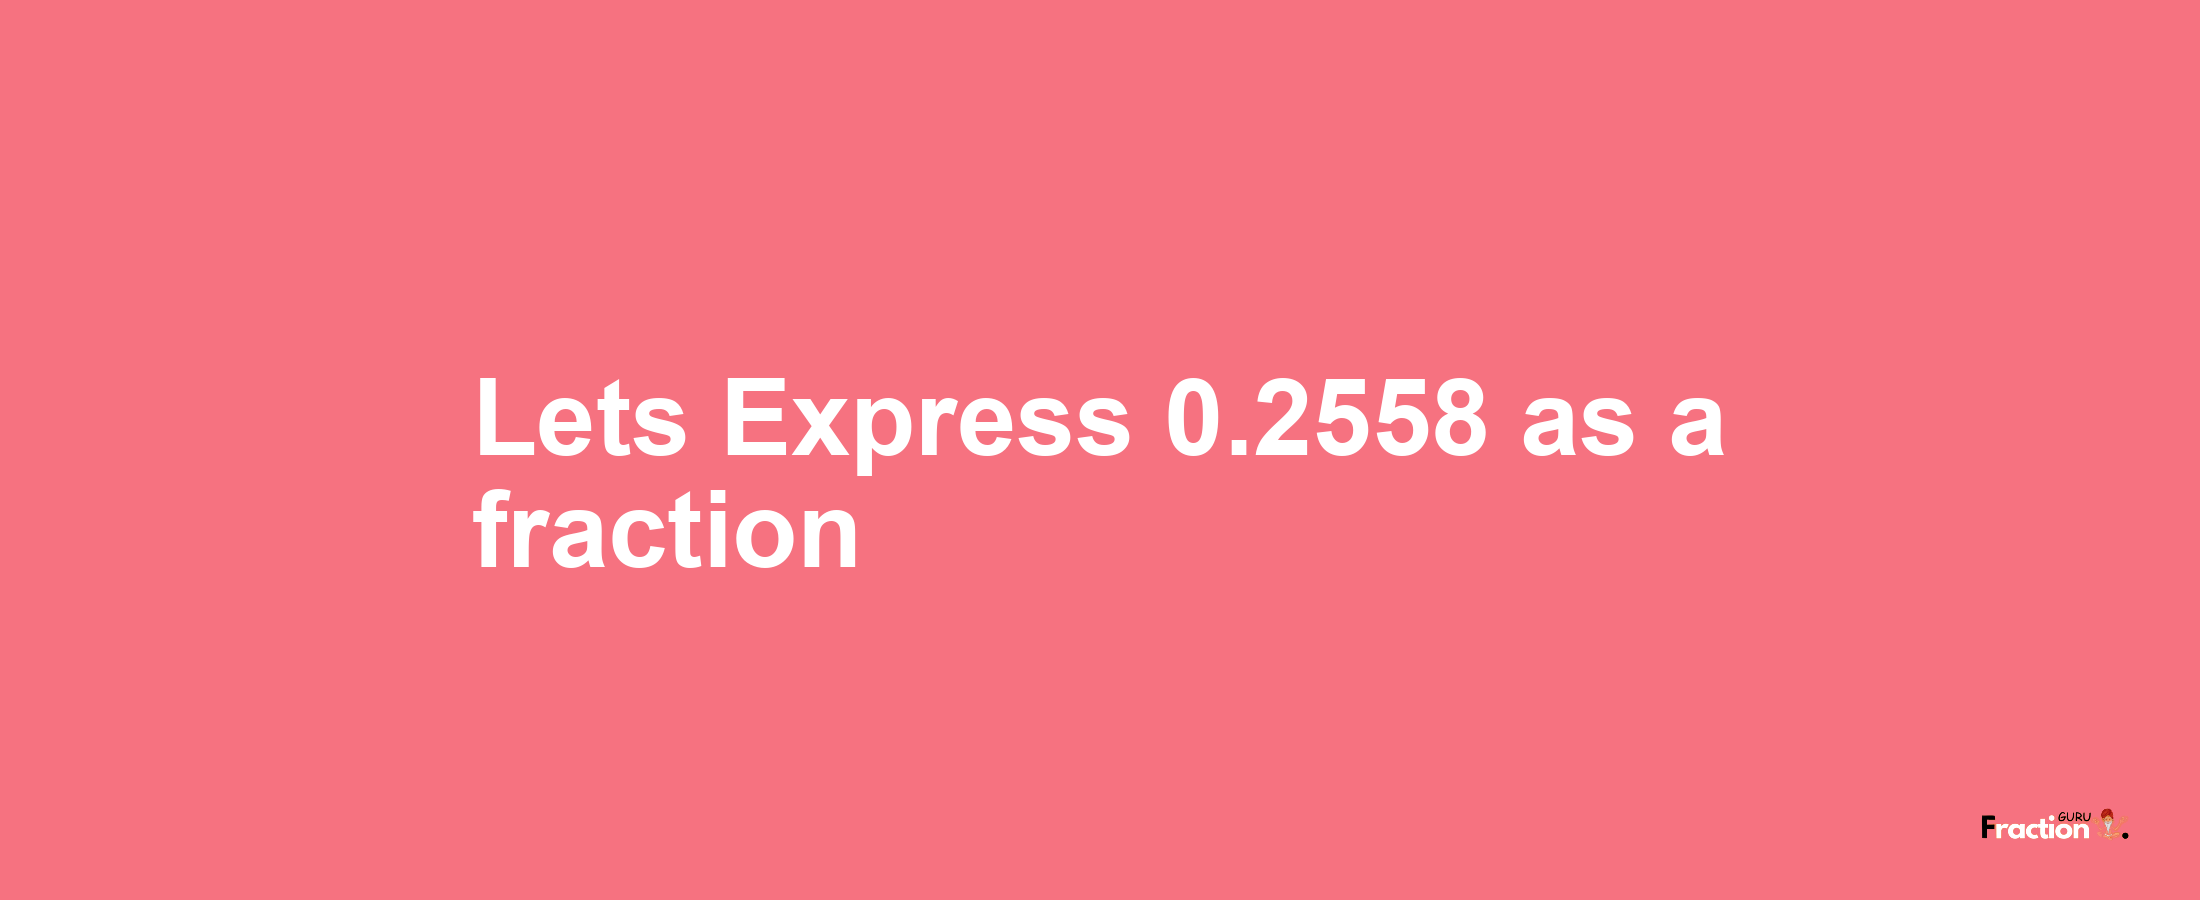 Lets Express 0.2558 as afraction